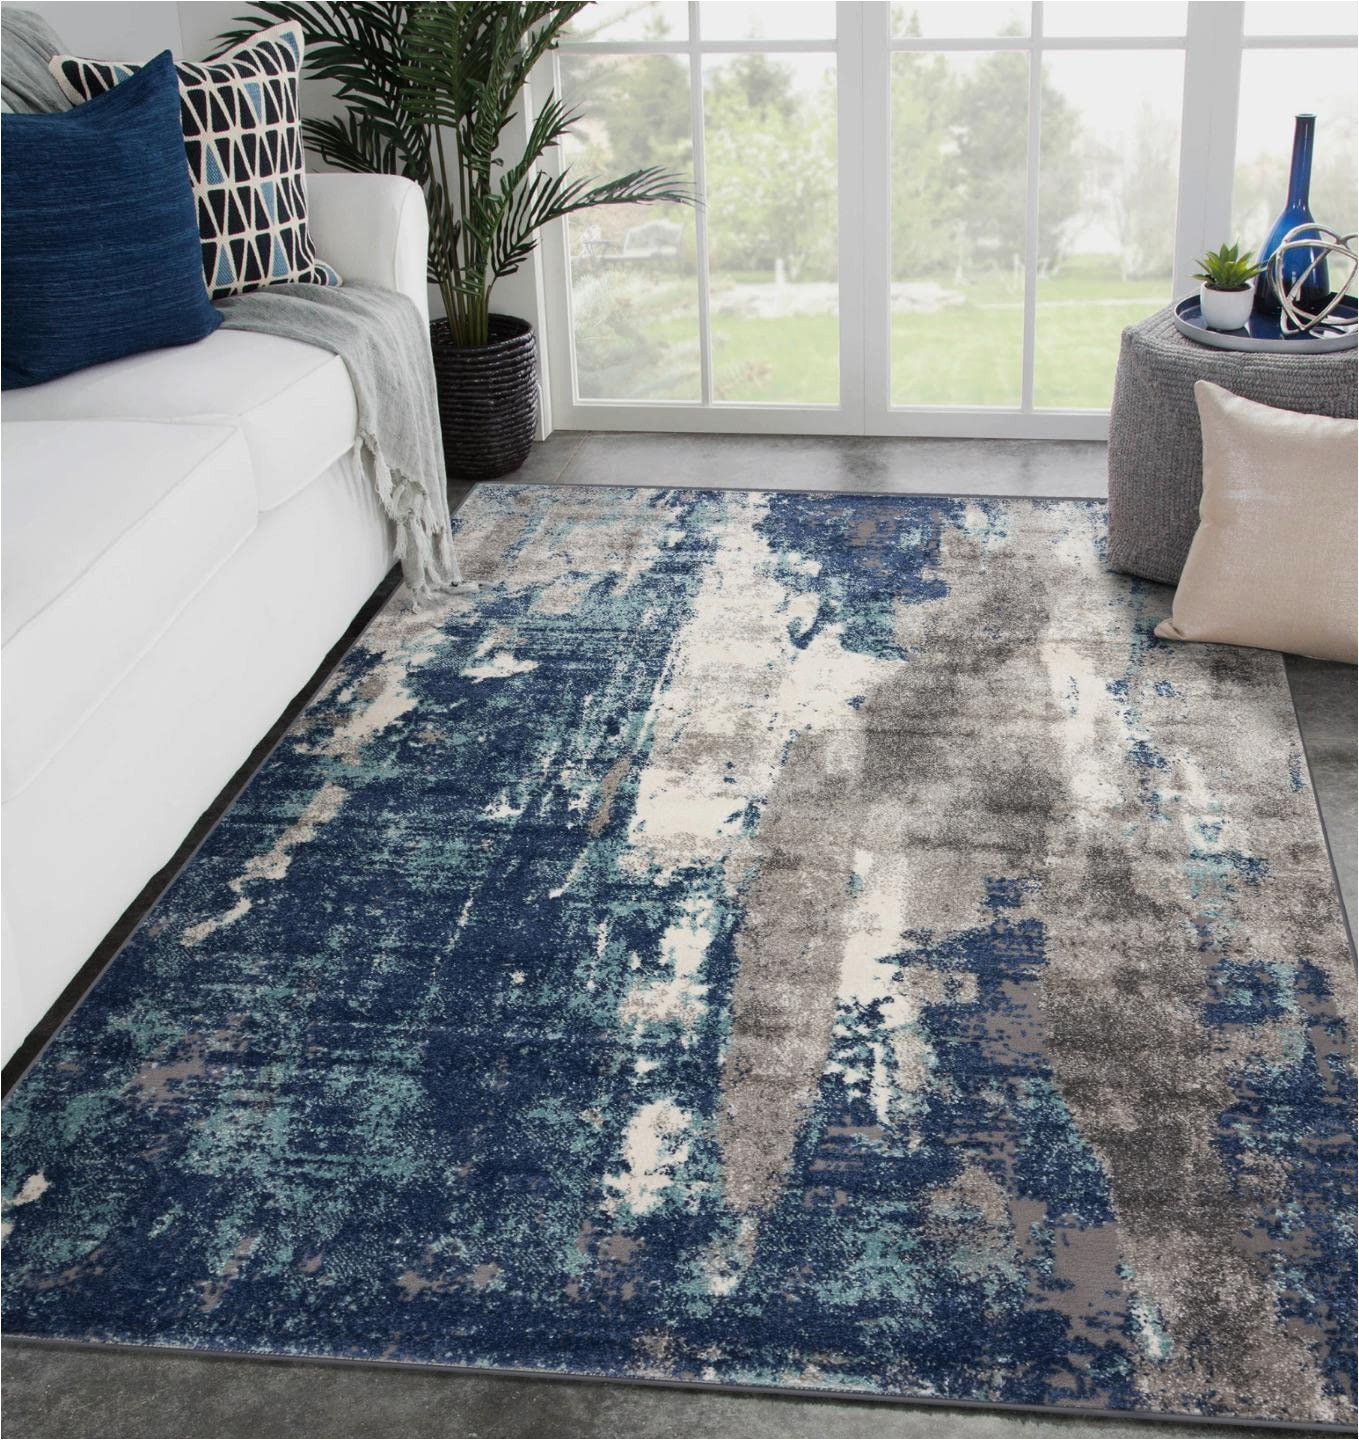 Area Rugs with Blue In them Amazon.com: Luxe Weavers Modern area Rugs with Abstract Patterns …